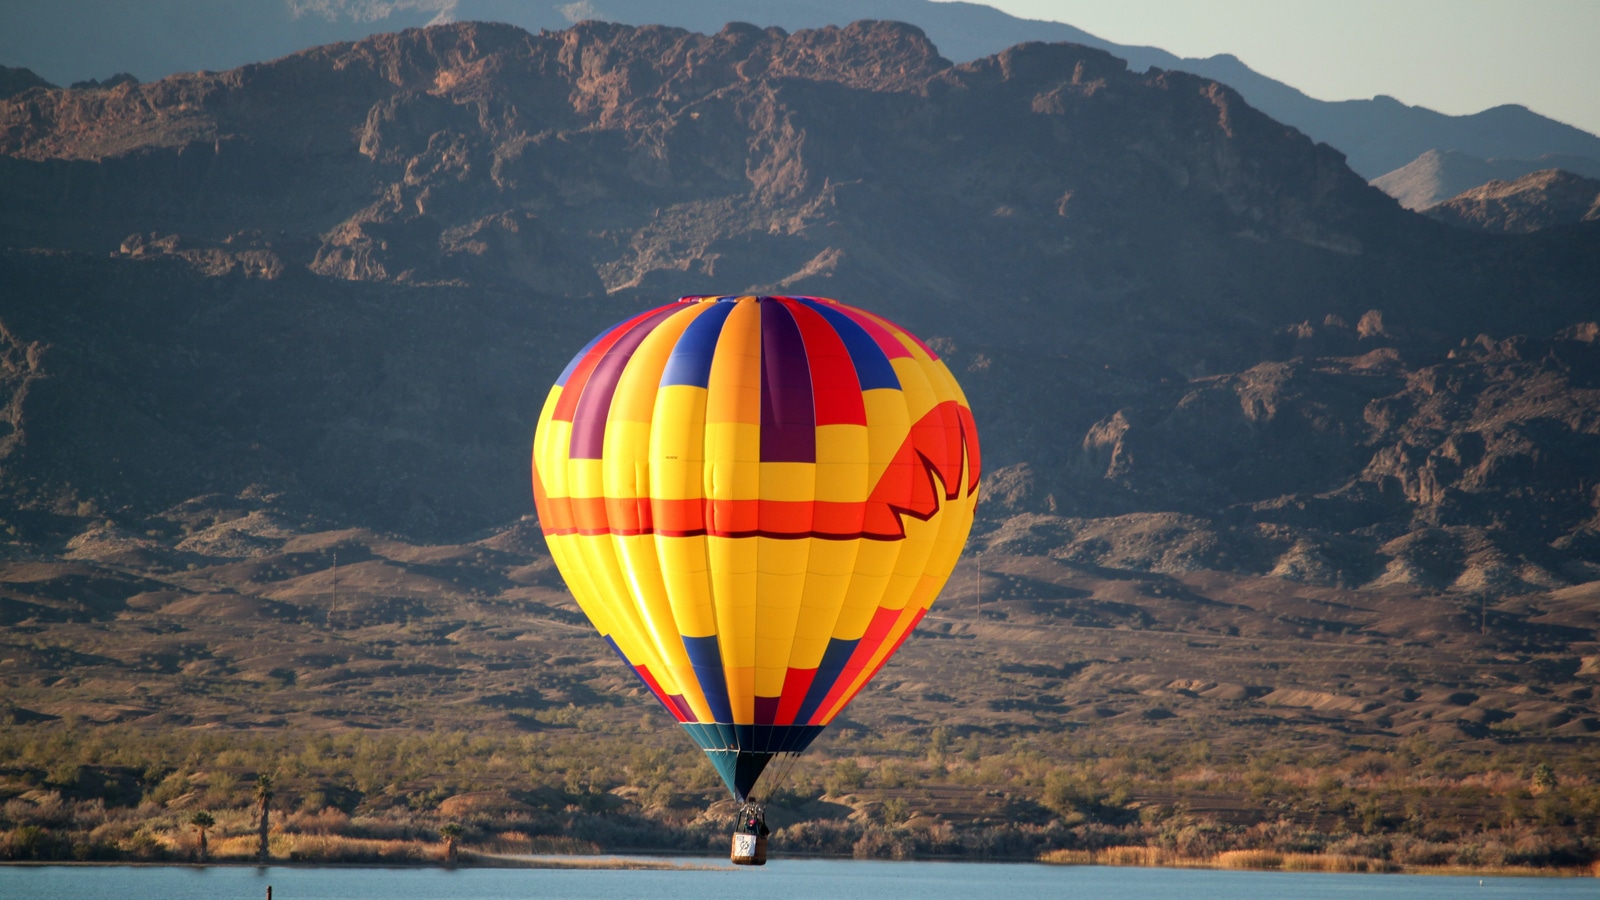 Hot Air Balloon Ride In Lake Havasu - One Of The Most  Romantic Date Ideas